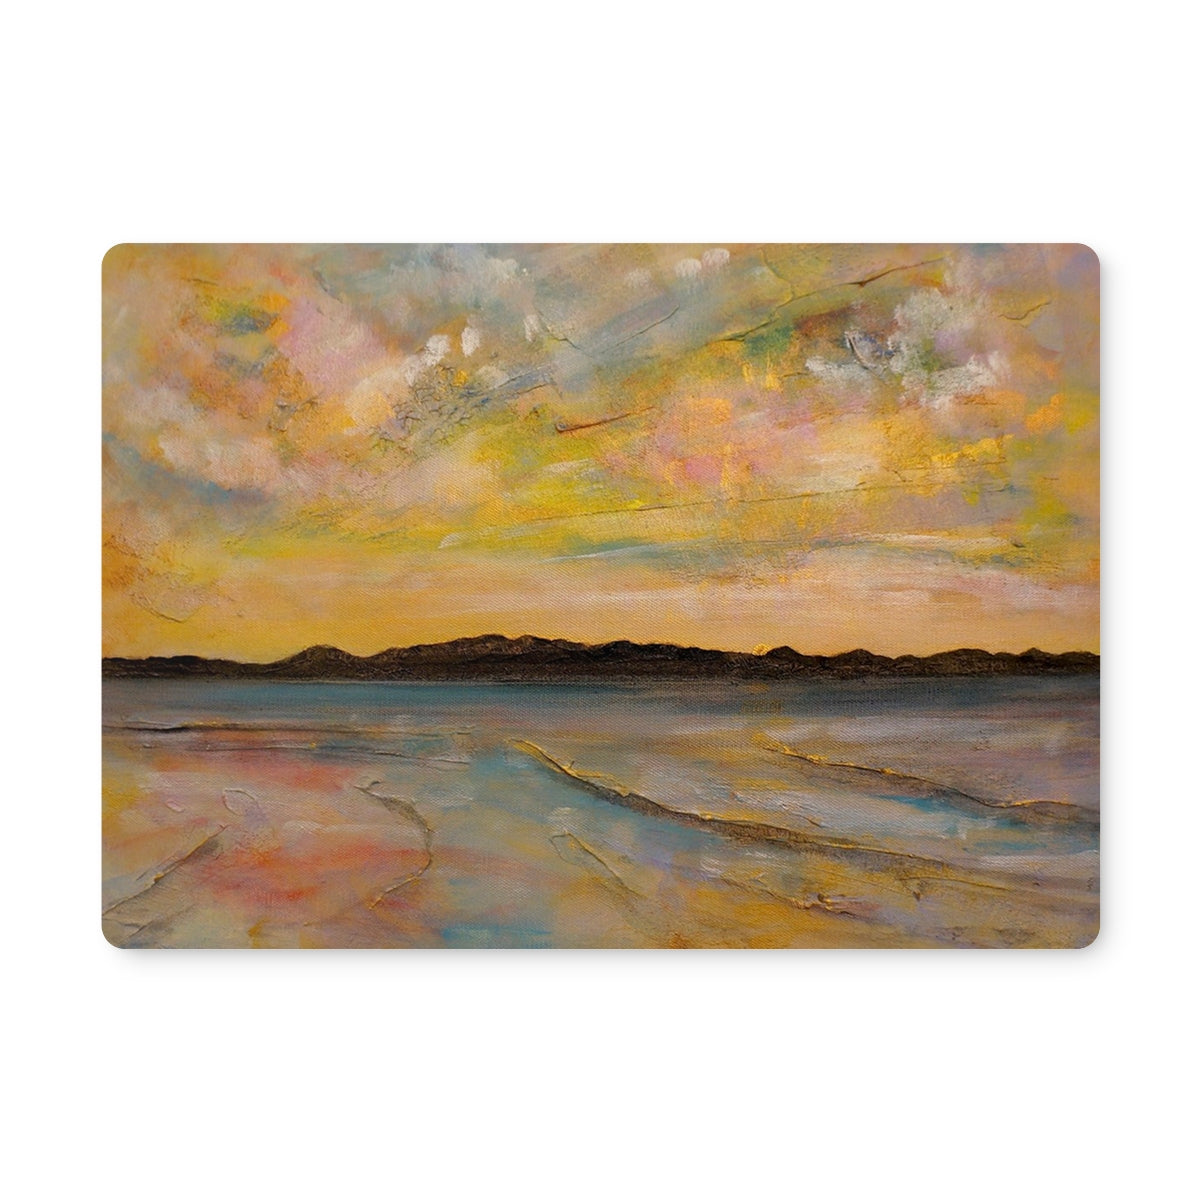 Vallay Island North Uist Art Gifts Placemat-Placemats-Hebridean Islands Art Gallery-4 Placemats-Paintings, Prints, Homeware, Art Gifts From Scotland By Scottish Artist Kevin Hunter